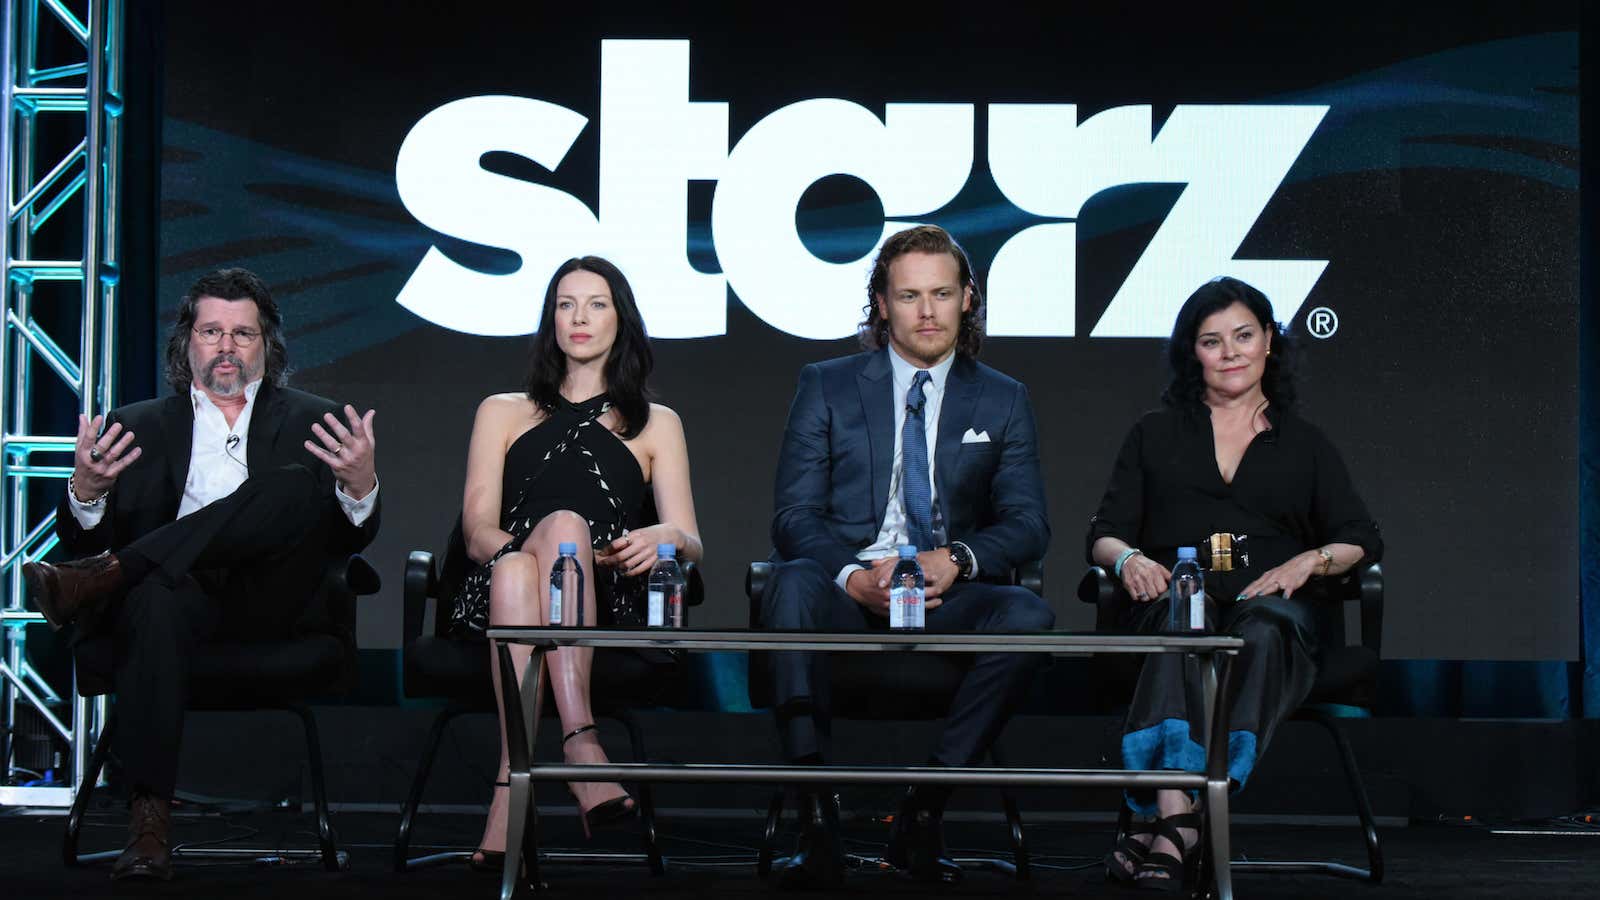 More content could prop up Starz.